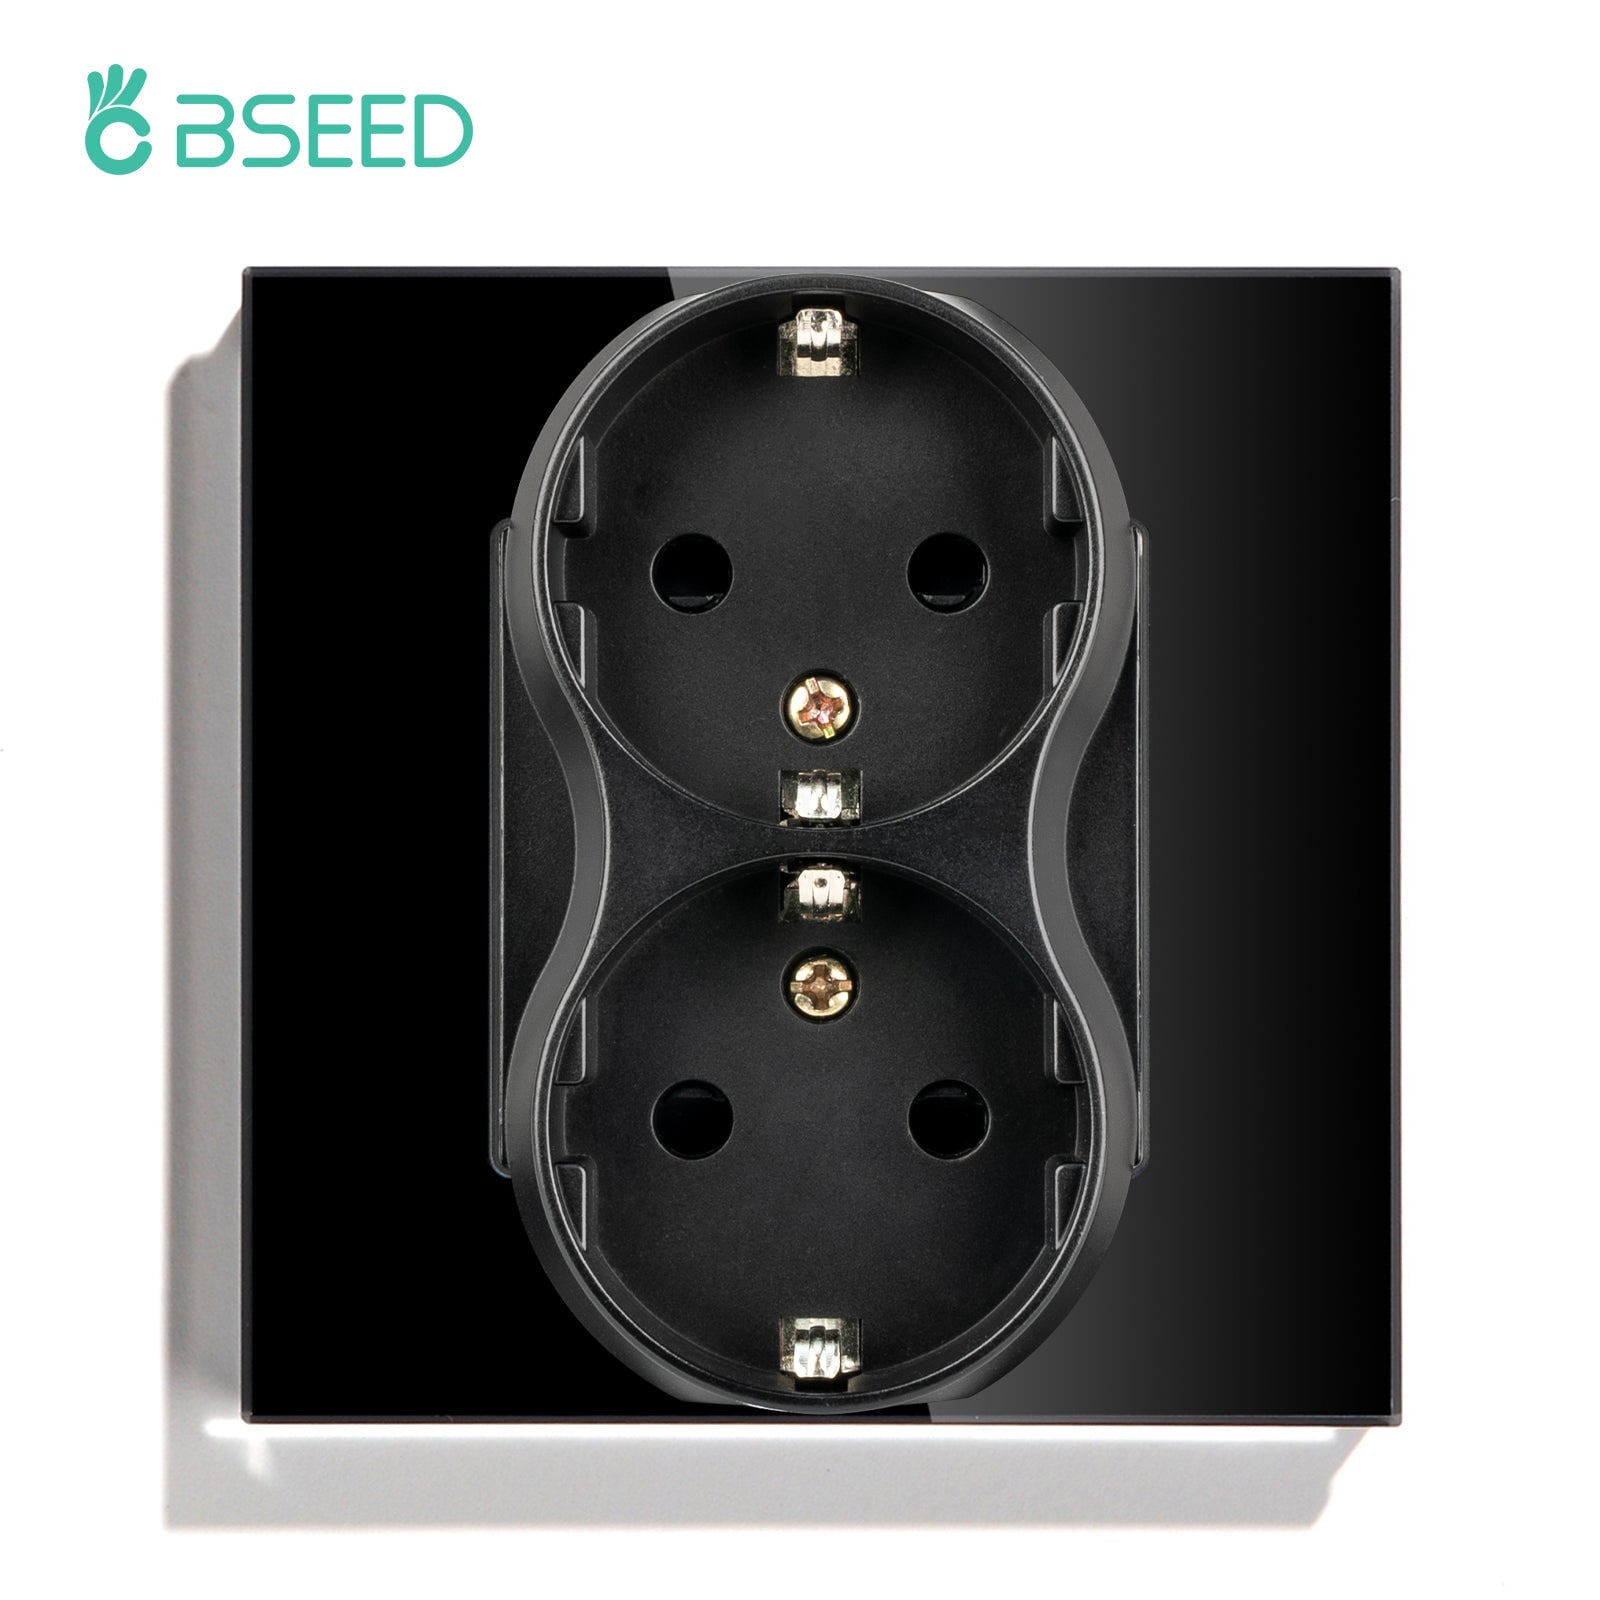 BSEED EU Double Sockets Power Wall Outlet Home Wall Power Sockets Glass Panel Power Outlets & Sockets Bseedswitch Black Single 